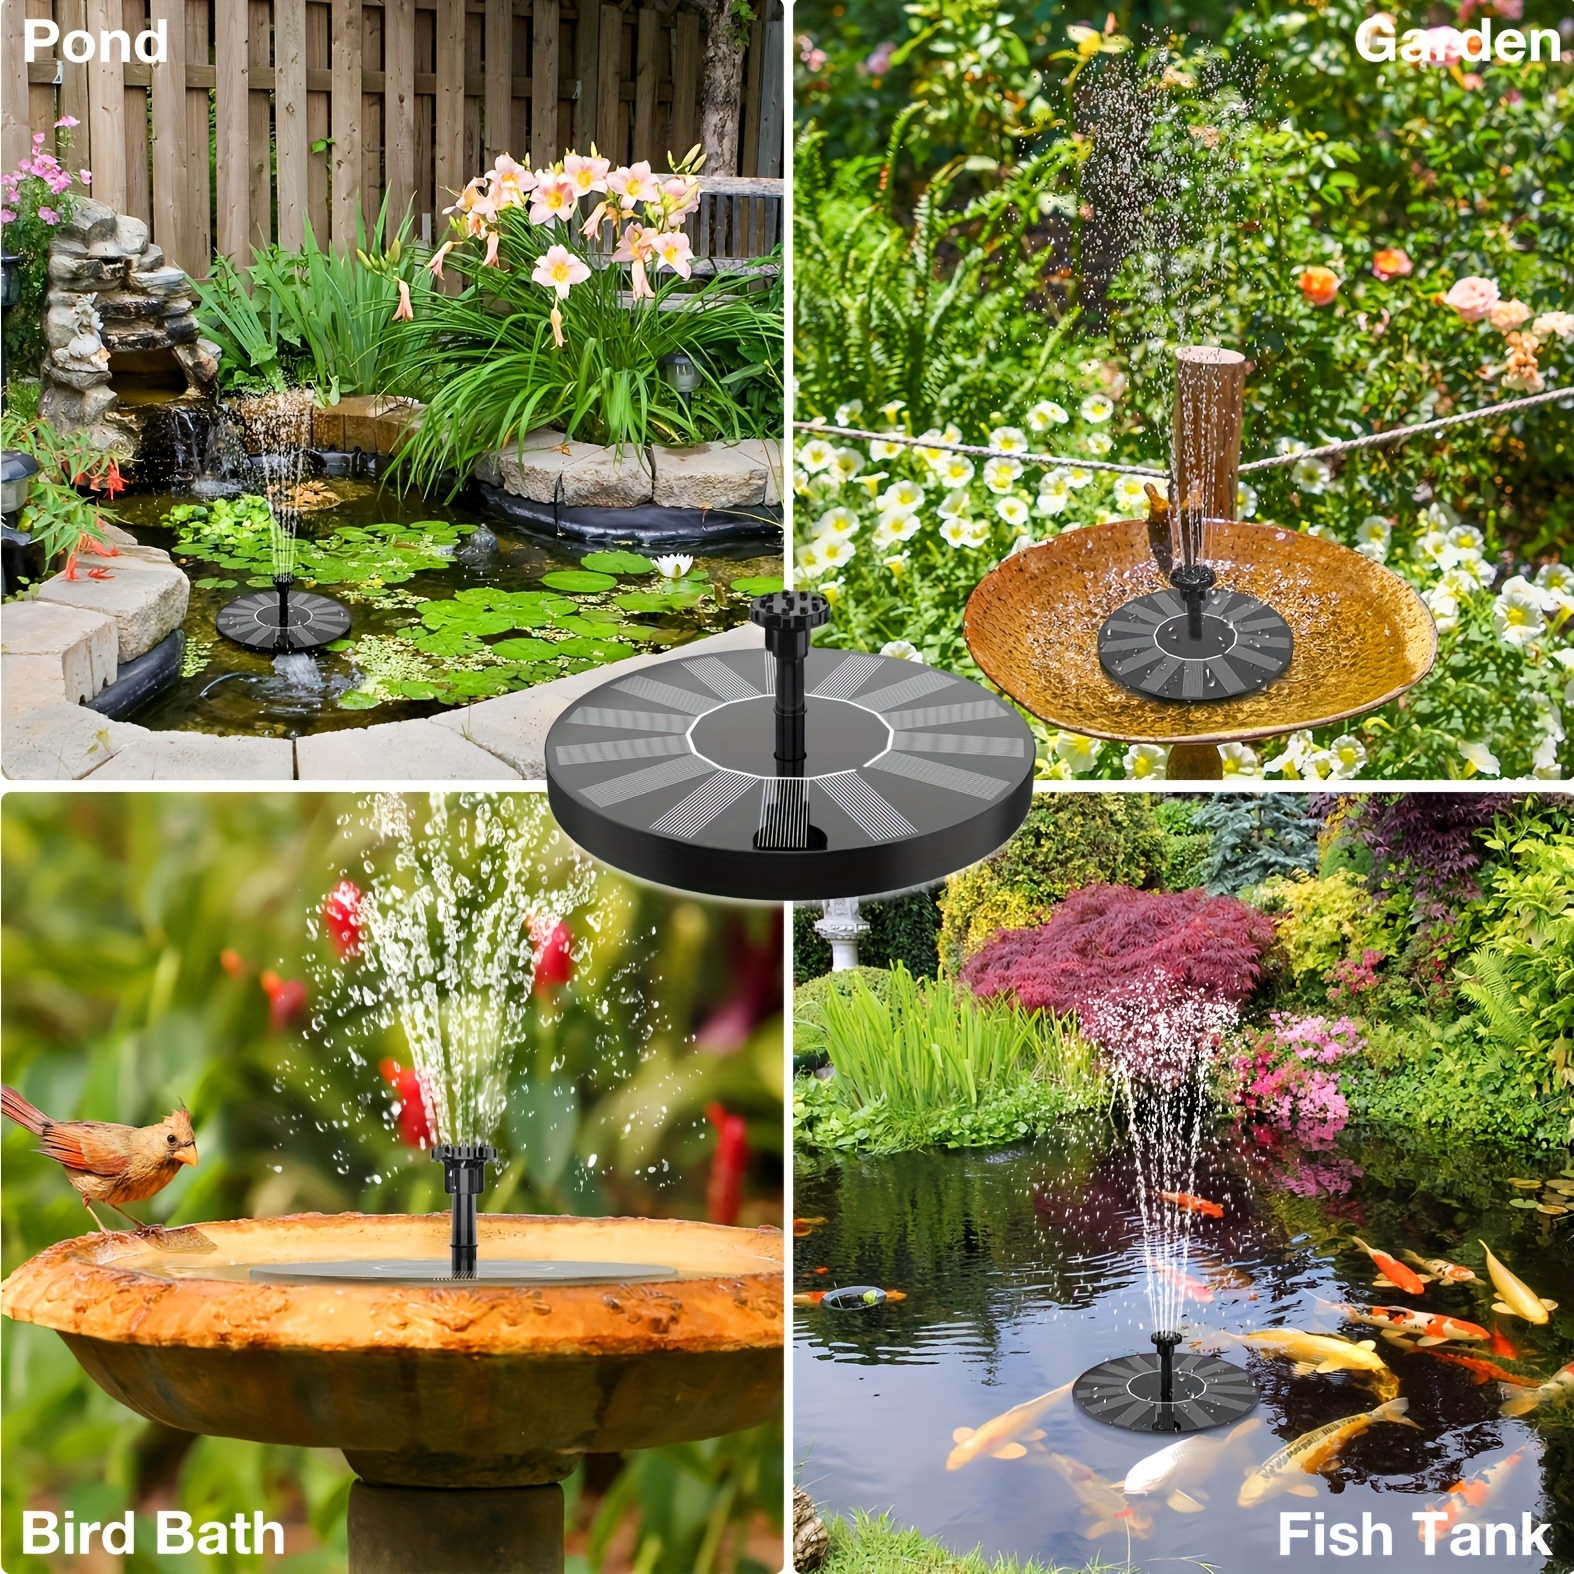 

1pc Solar Fountain Pump, 5.12 Inch Plastic Solar Panel With 7 Nozzle Attachments, Solar Powered Water Feature For Bird Bath, Garden, Ponds, Pool, Fish Tank, Aquarium, And Outdoor Use